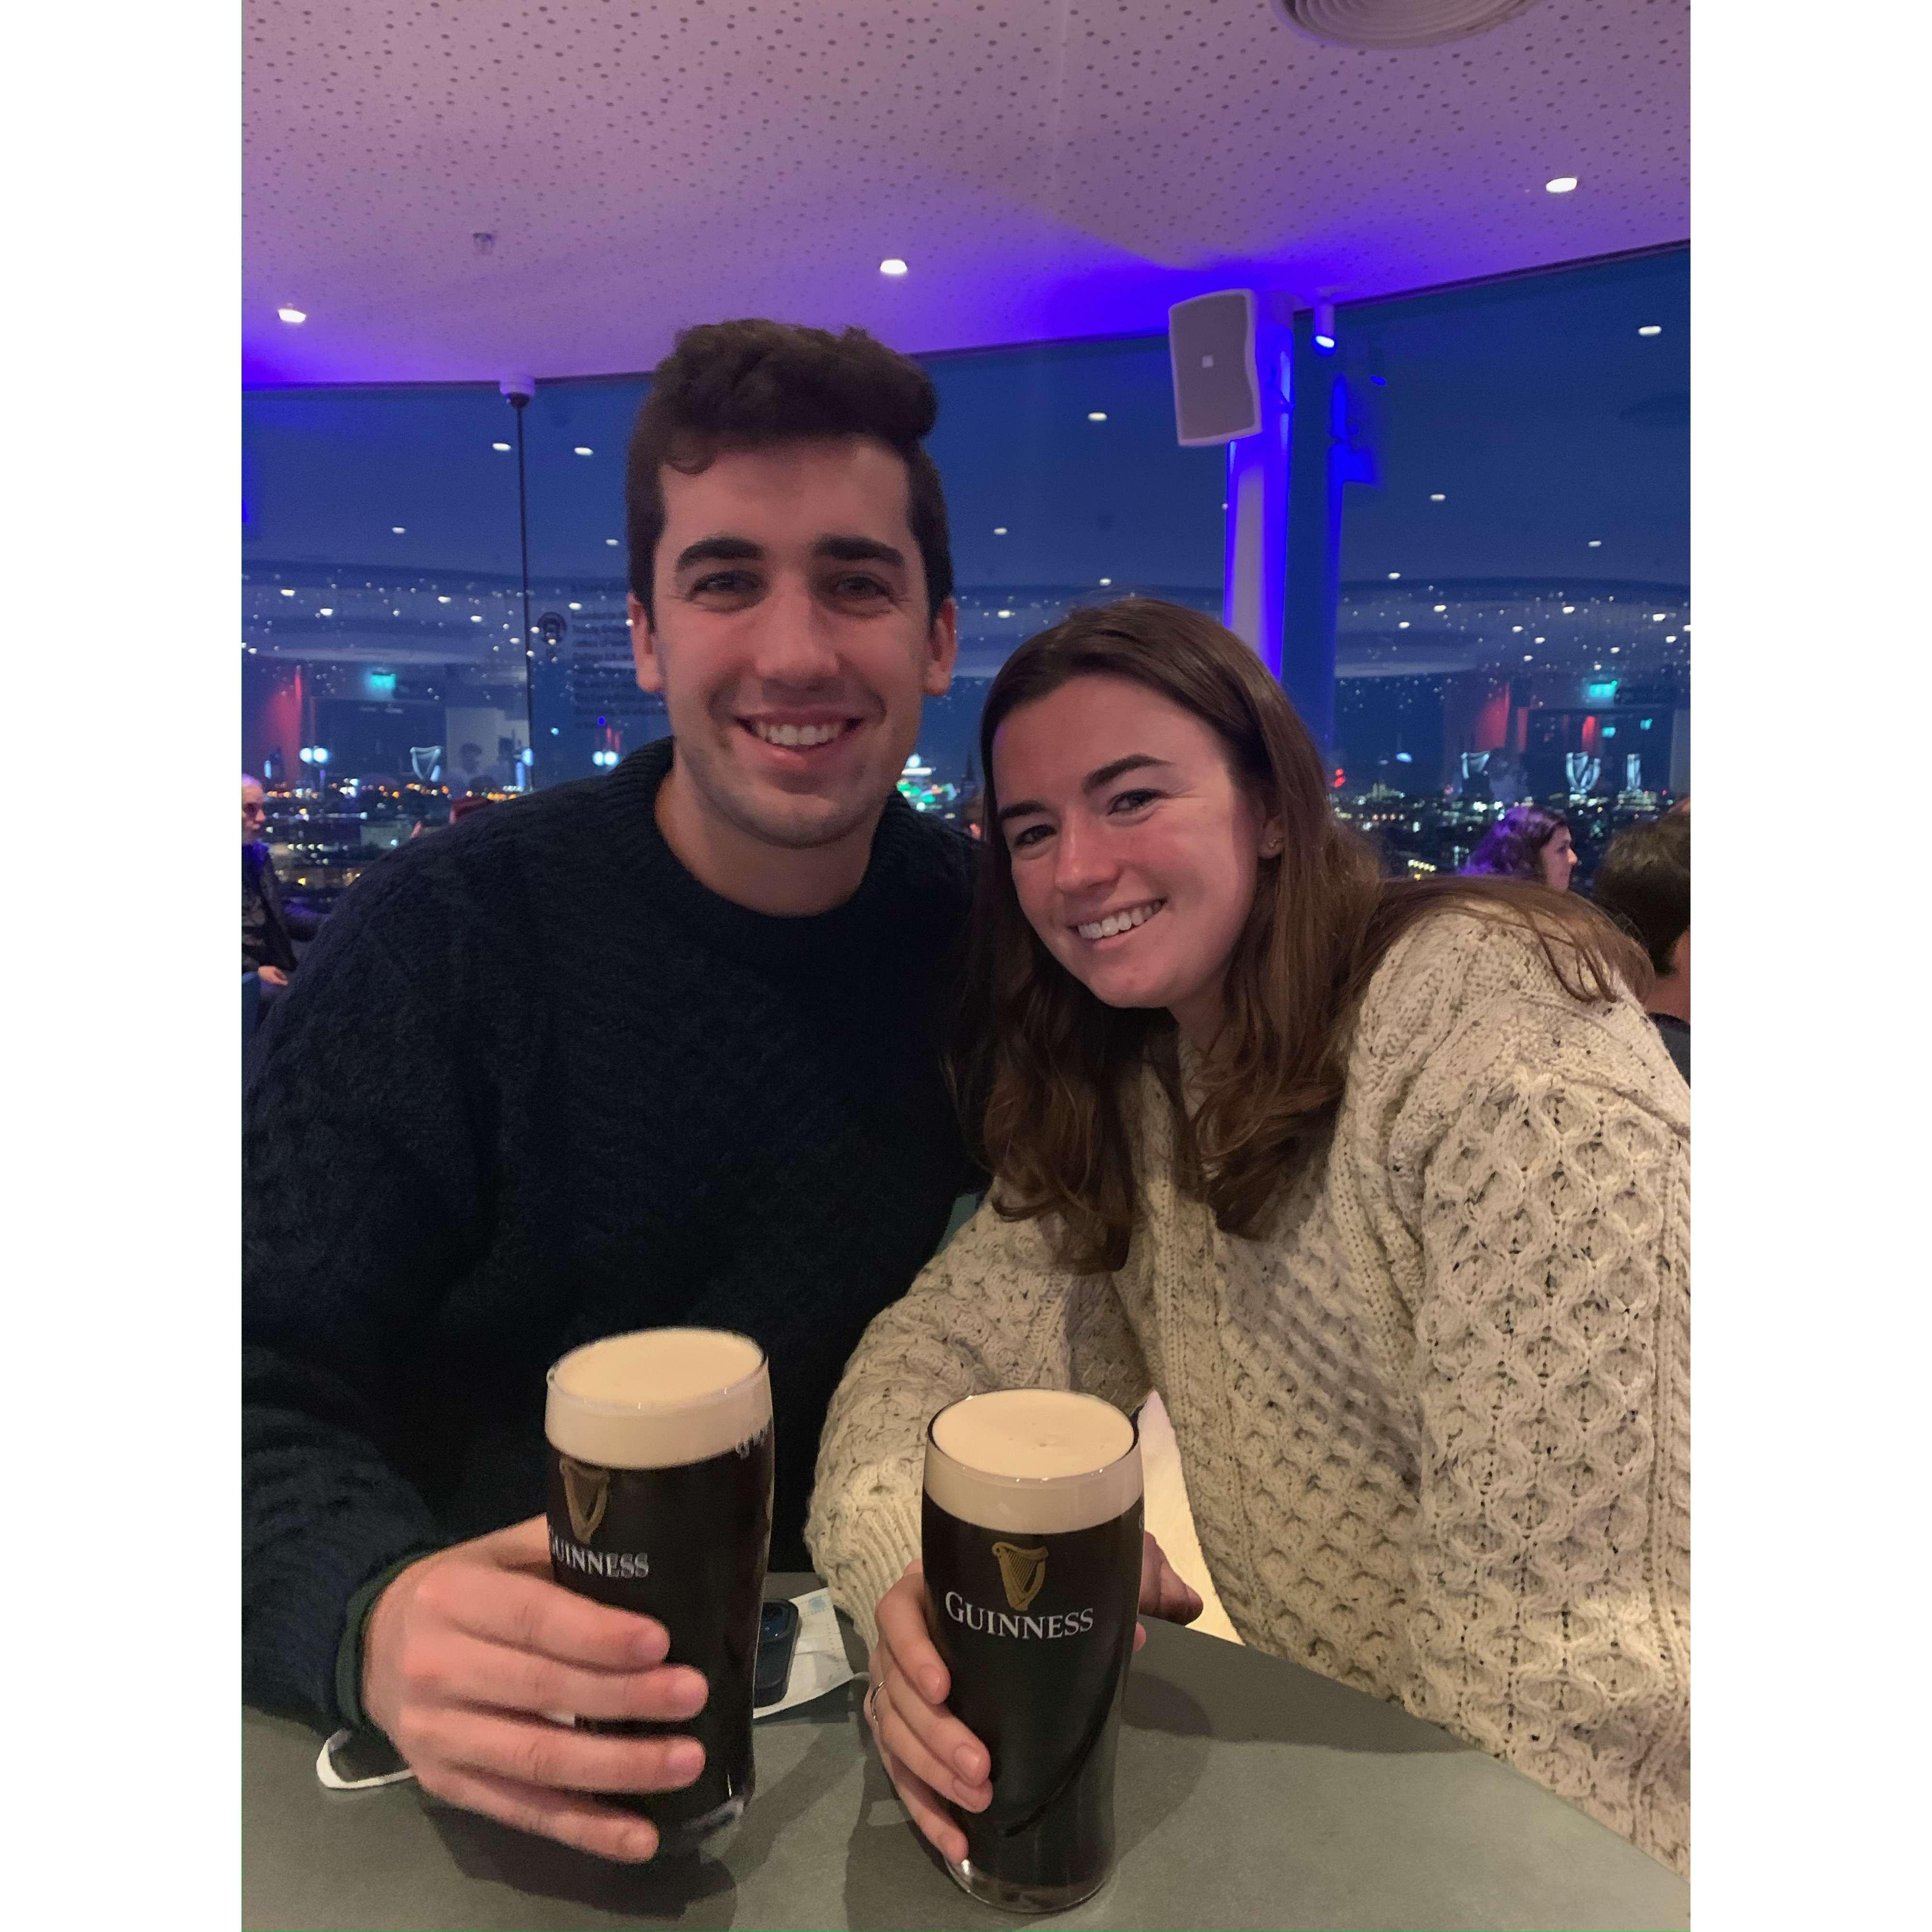 Guinness Factory in Dublin in our matching Irish sweaters -- definitely not tourists